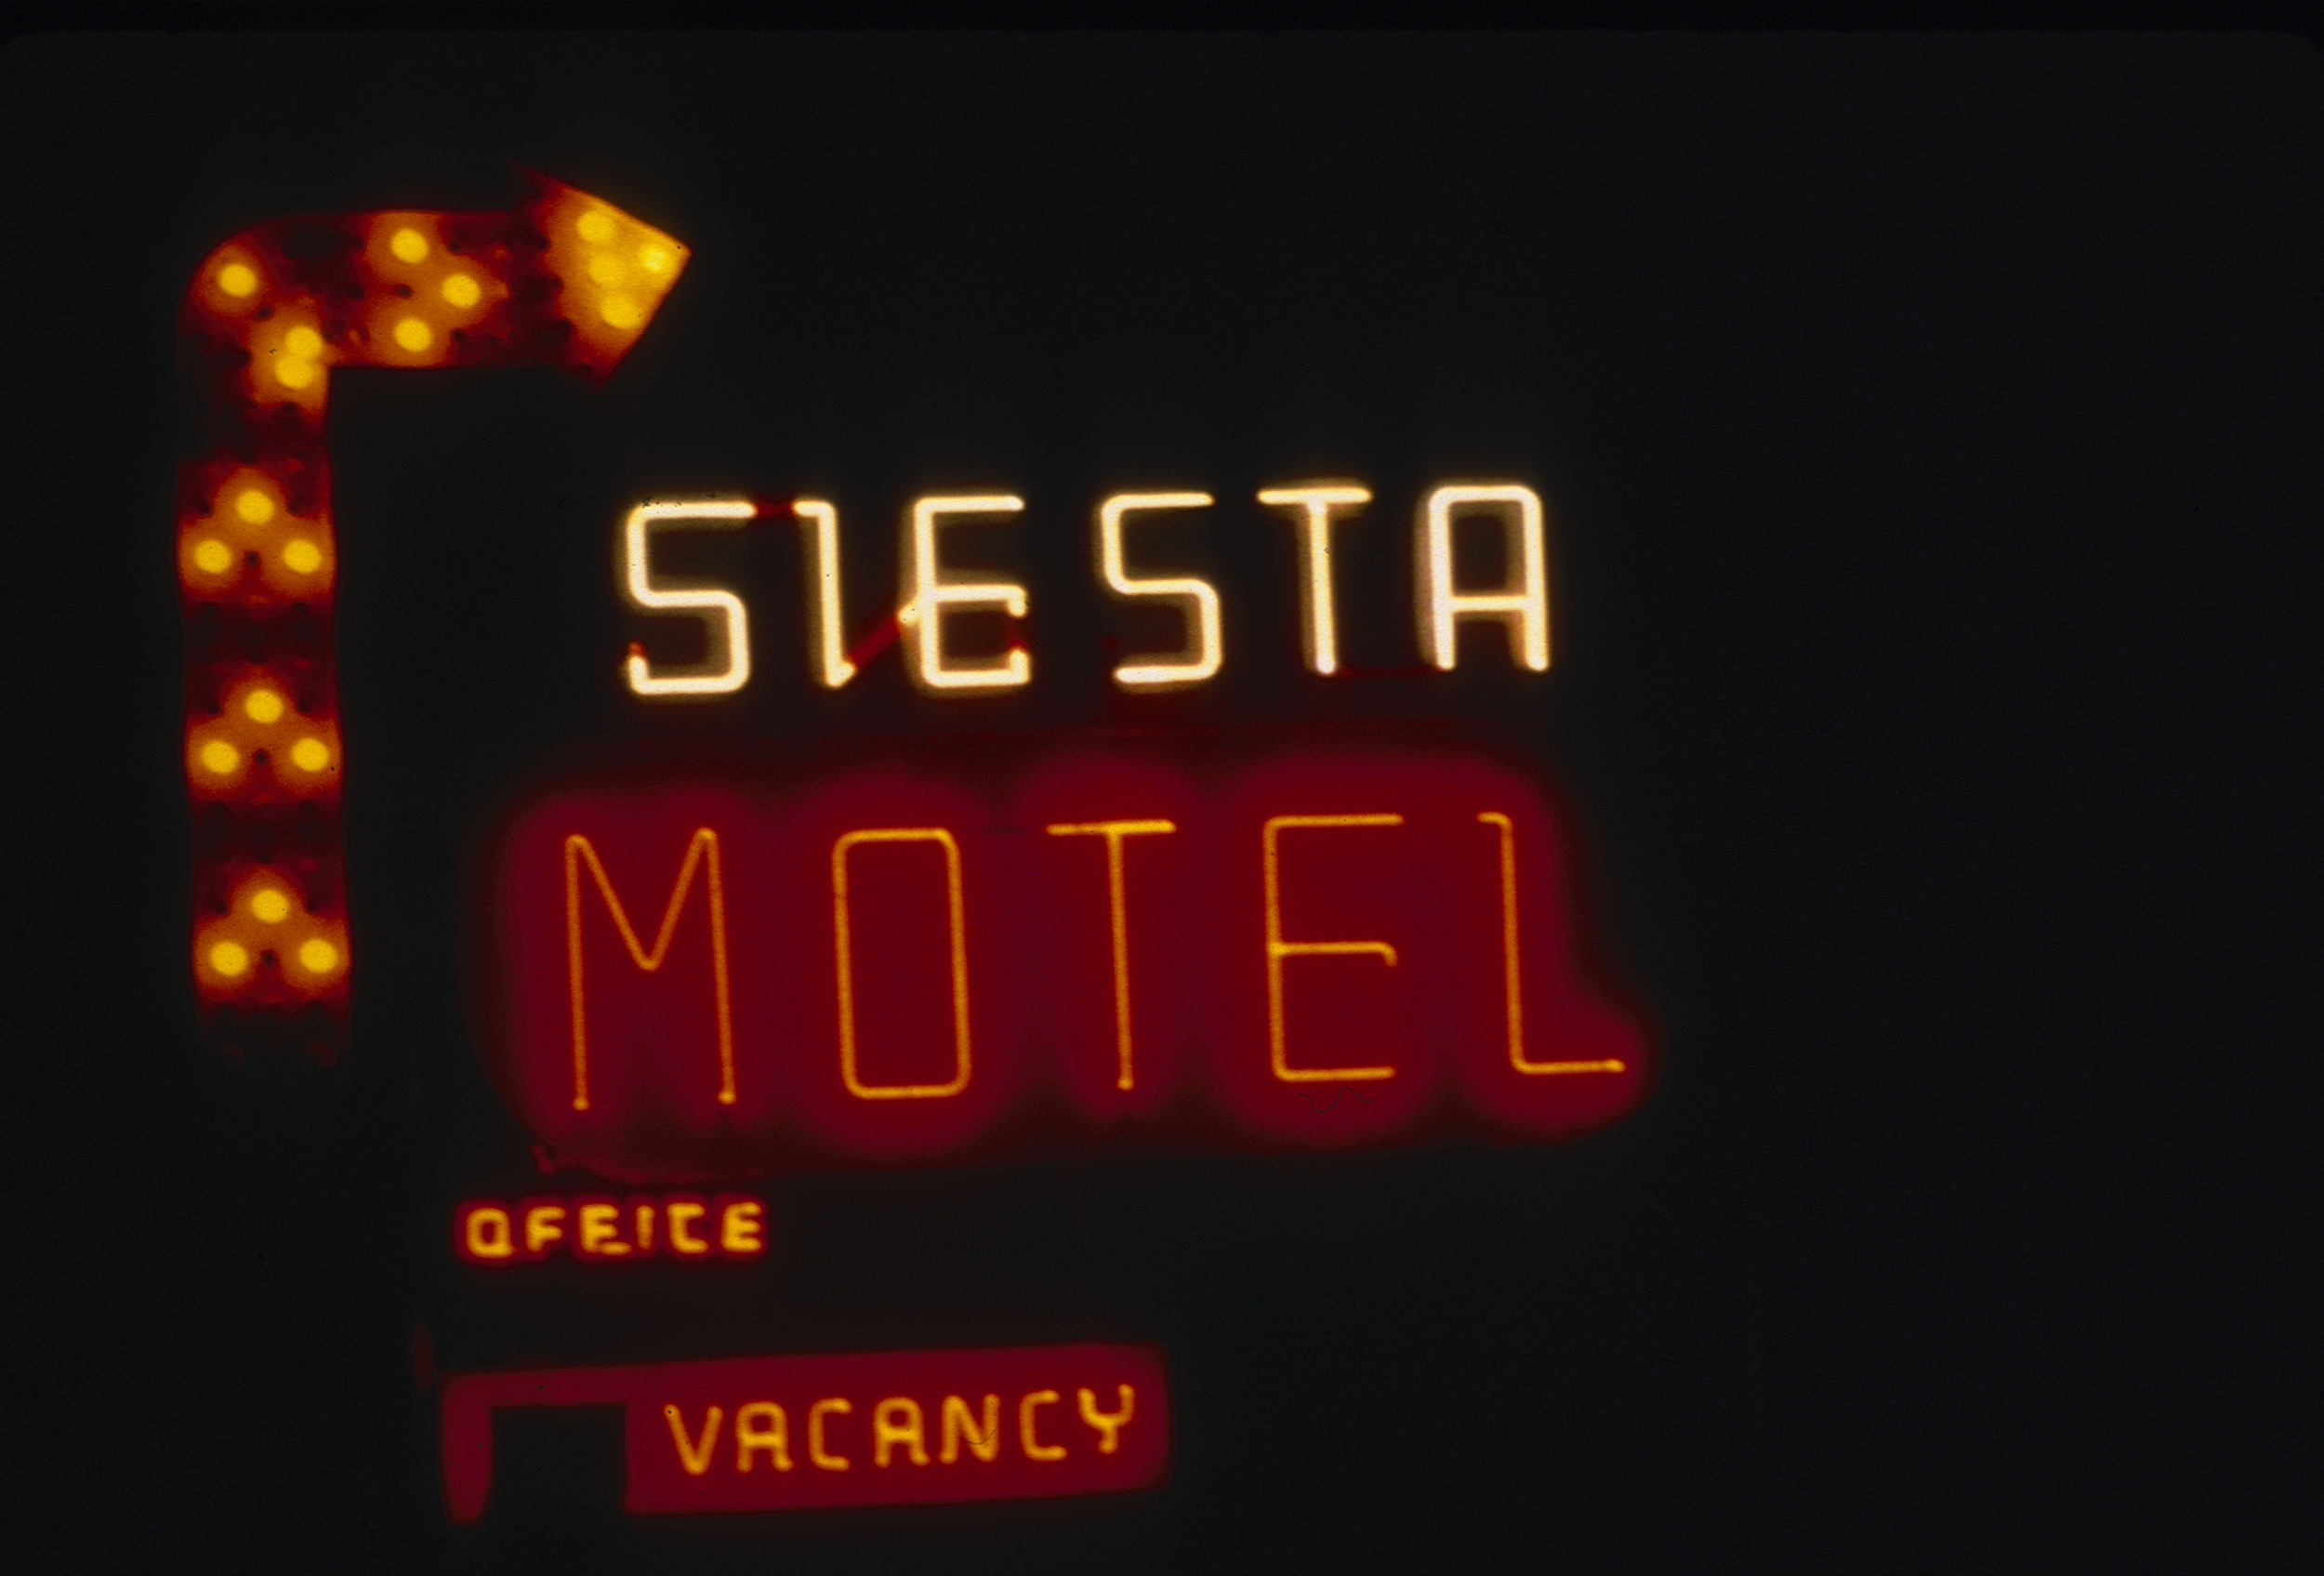 Slide of the neon sign for the Siesta Motel at night, Reno, Nevada, 1986